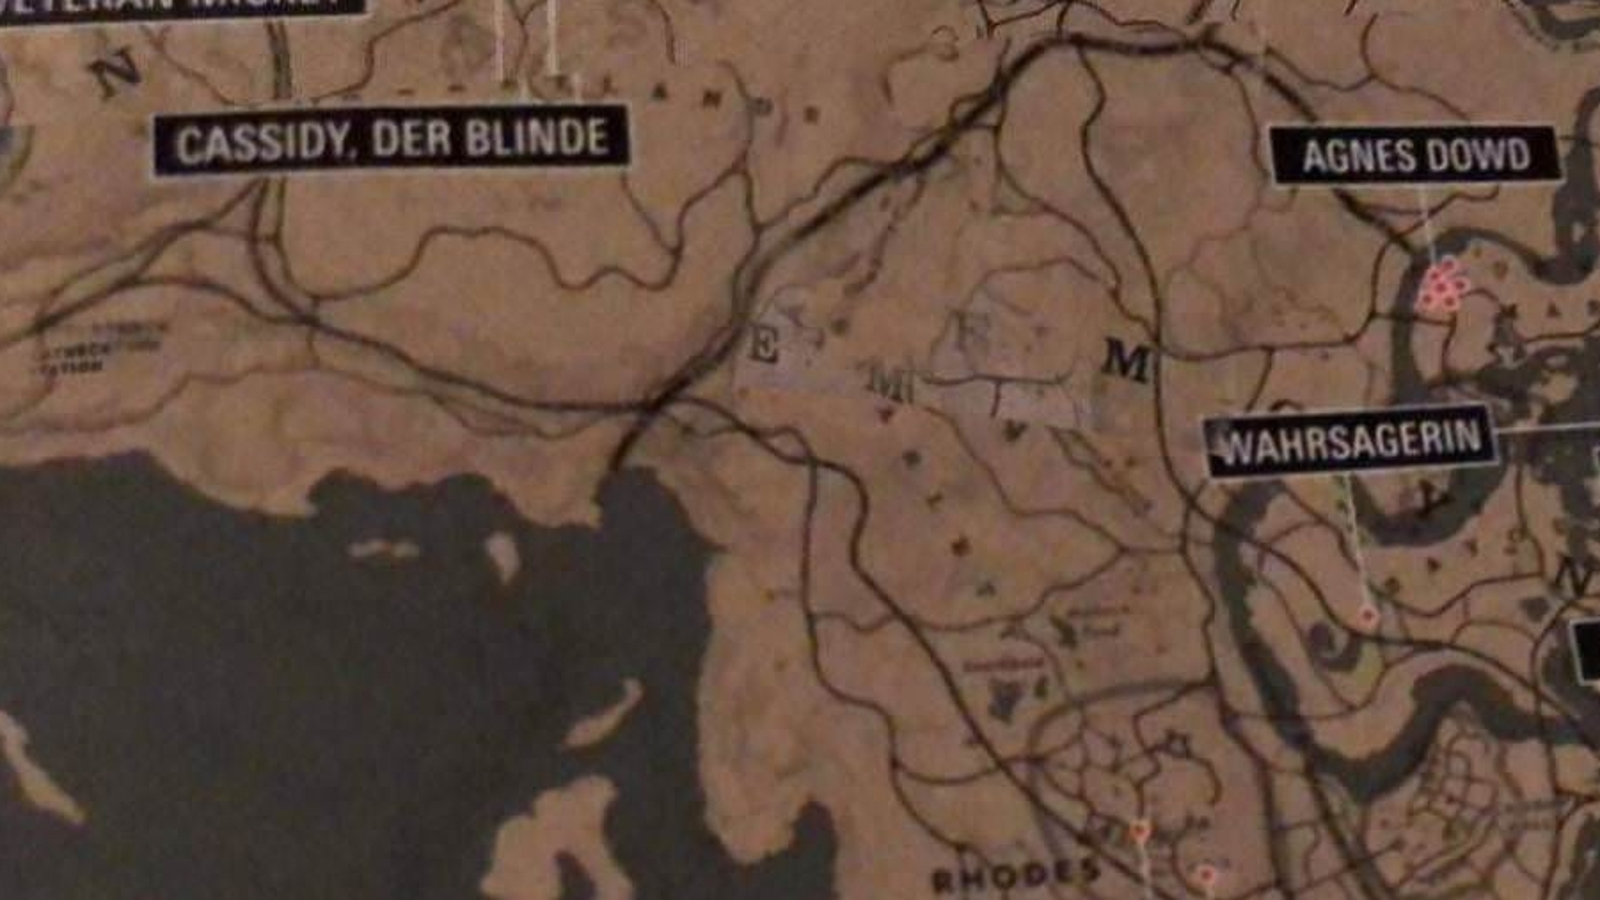 Why fans are excited about this leaked Red Dead Redemption 2 map